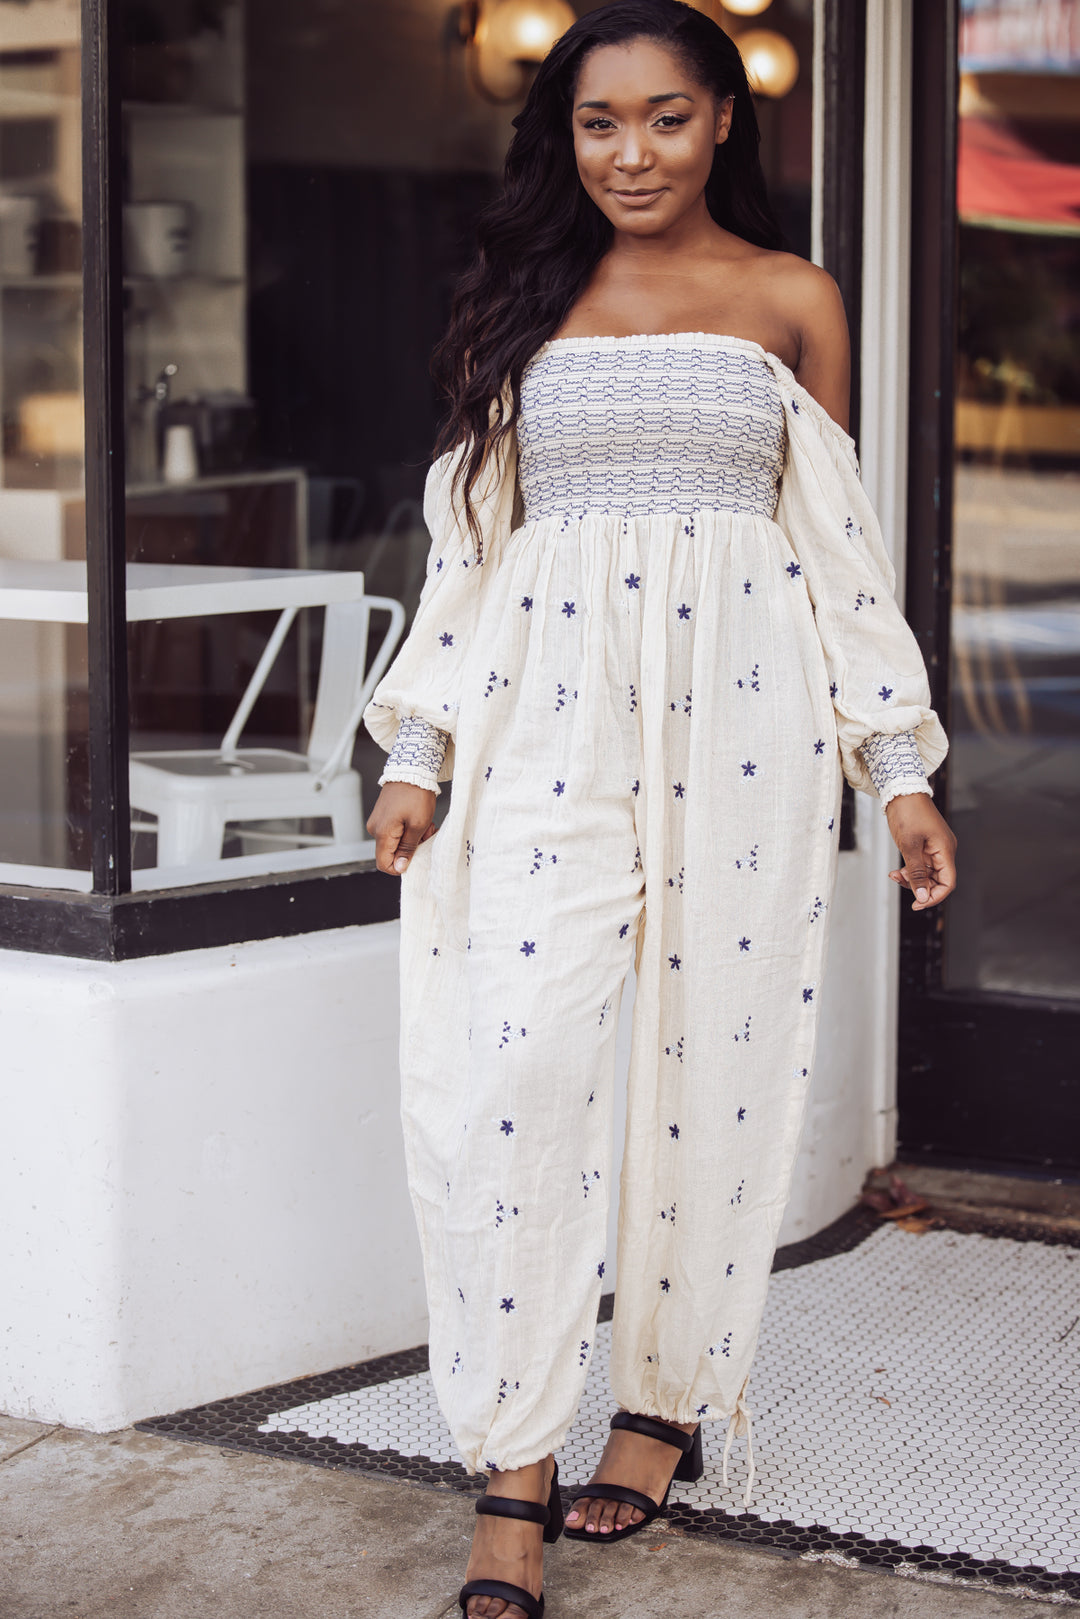 FREE PEOPLE - DAHLIA JUMPSUIT - WASHED OUT